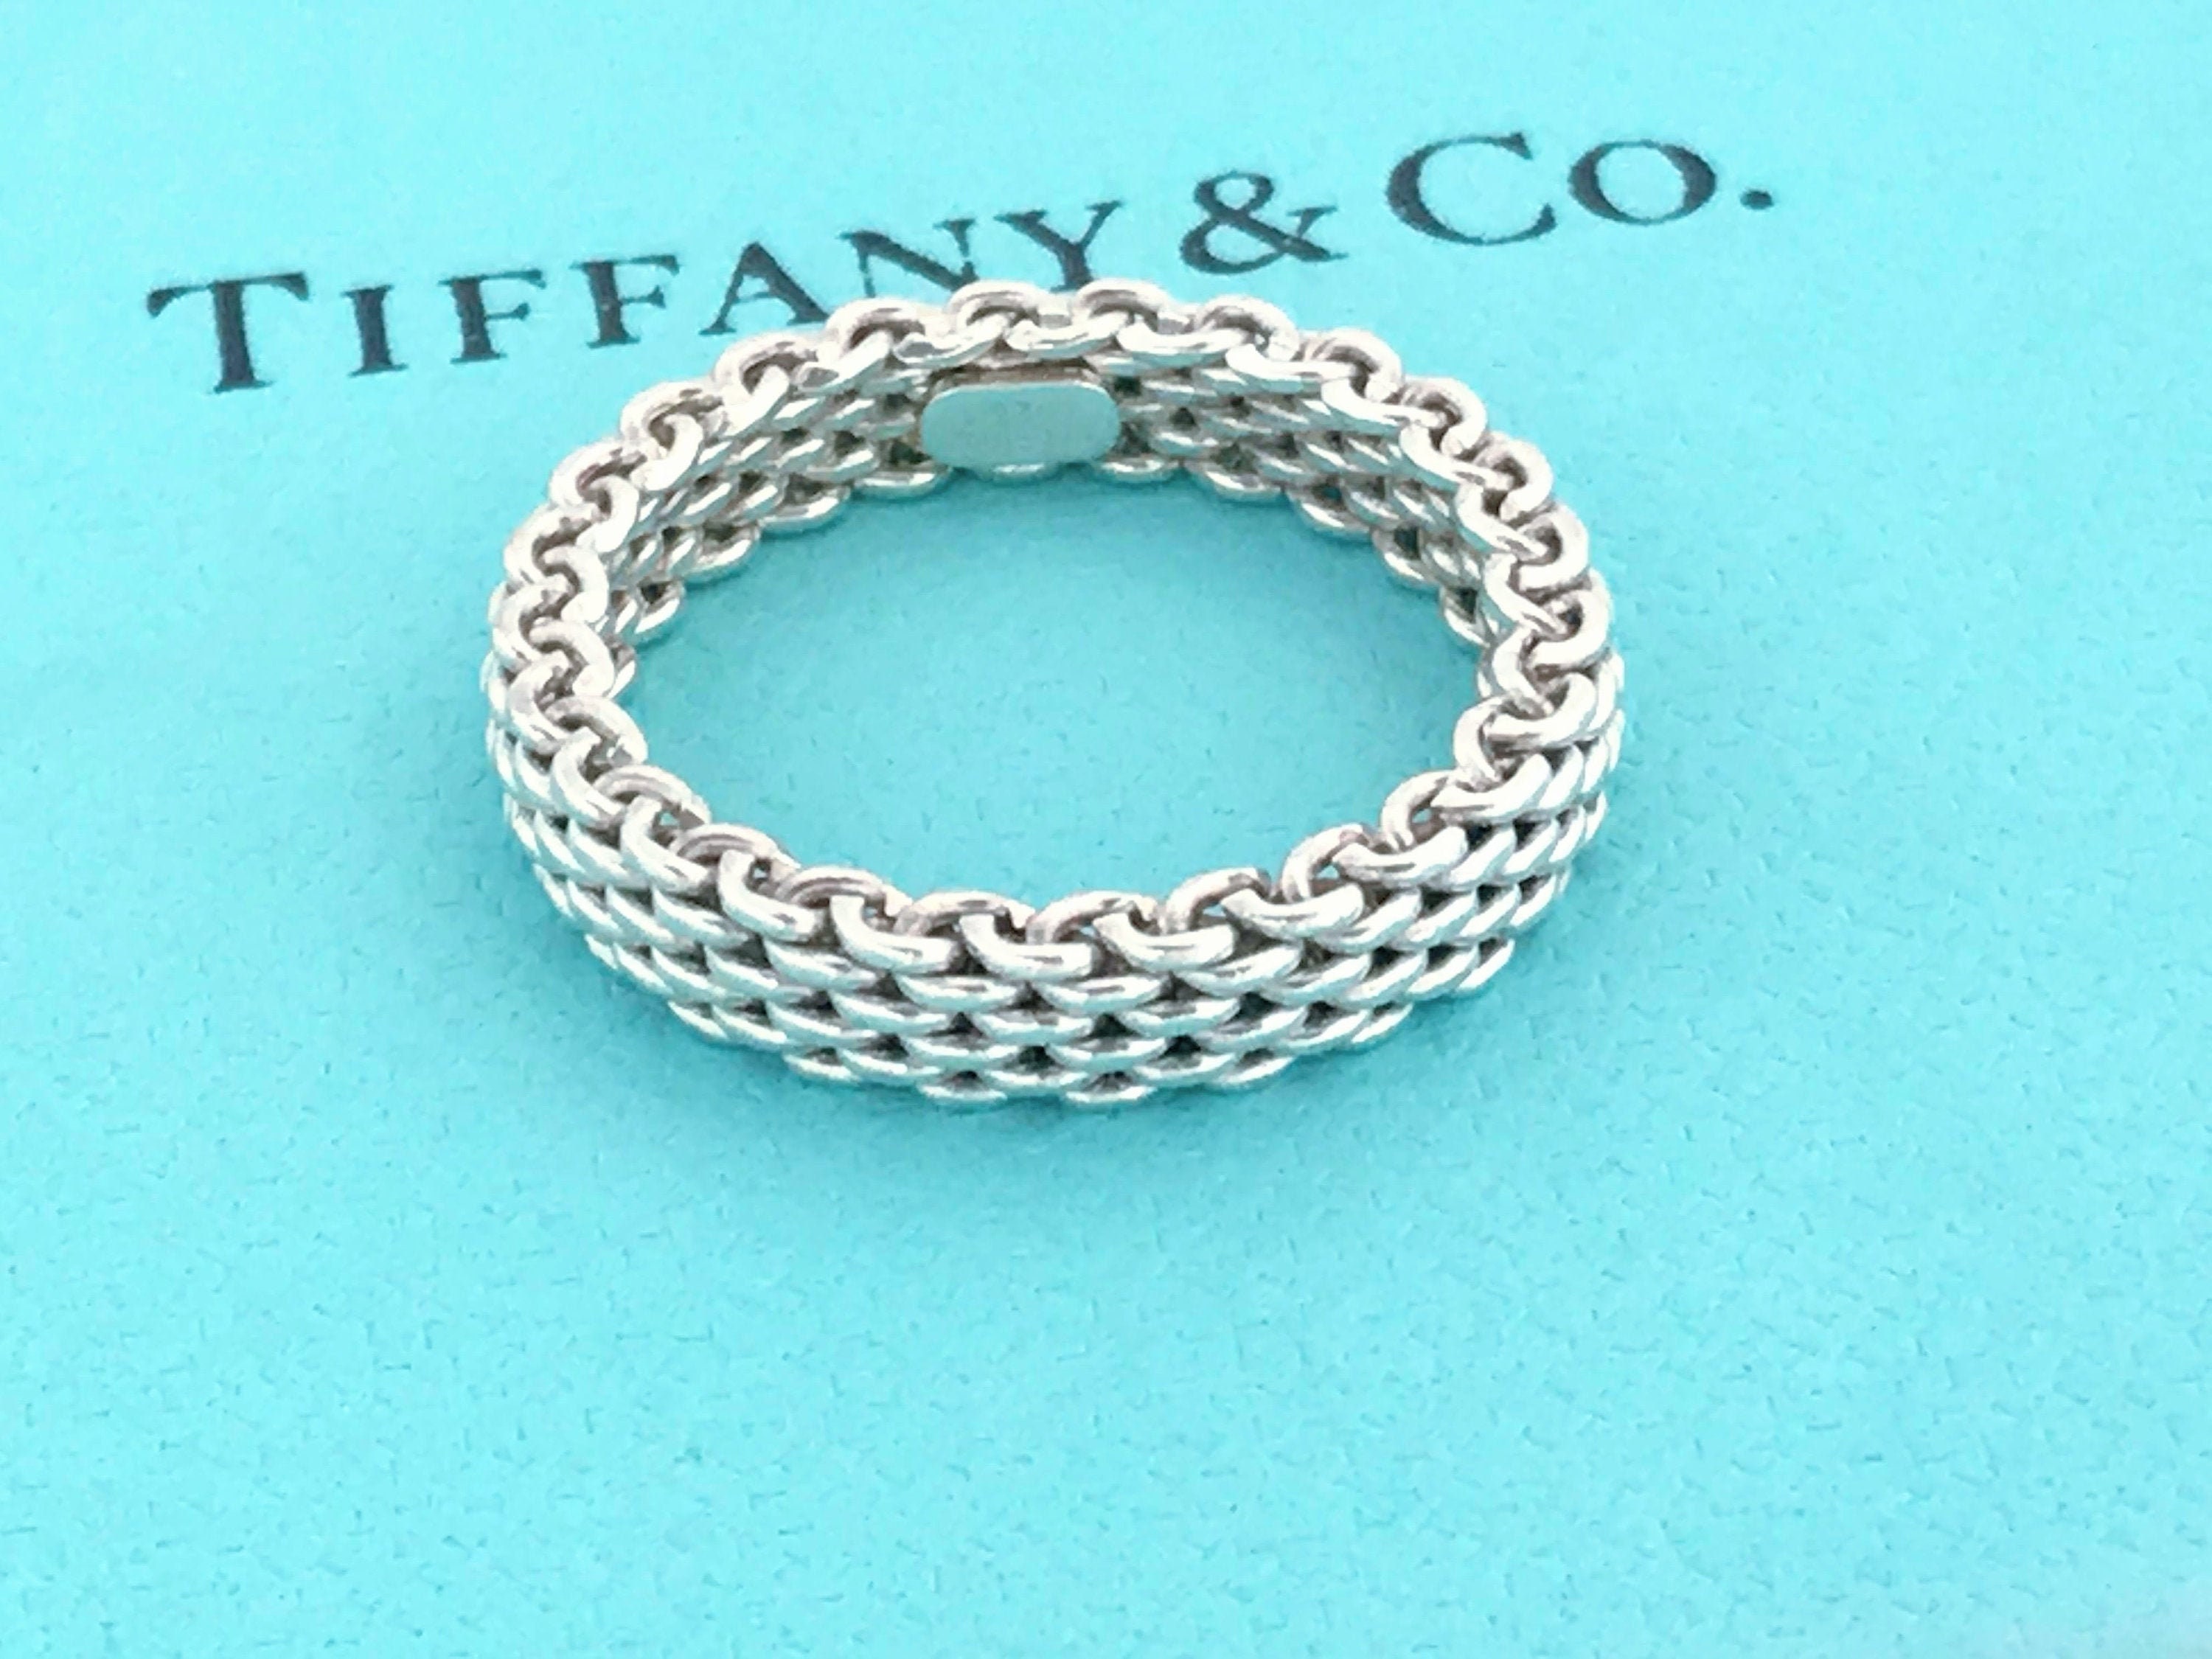 Vintage Tiffany & Co. 0.05 CTW Diamond Somerset Mesh Ring - Shop Jewelry -  Shop Jewelry, Watches & Accessories